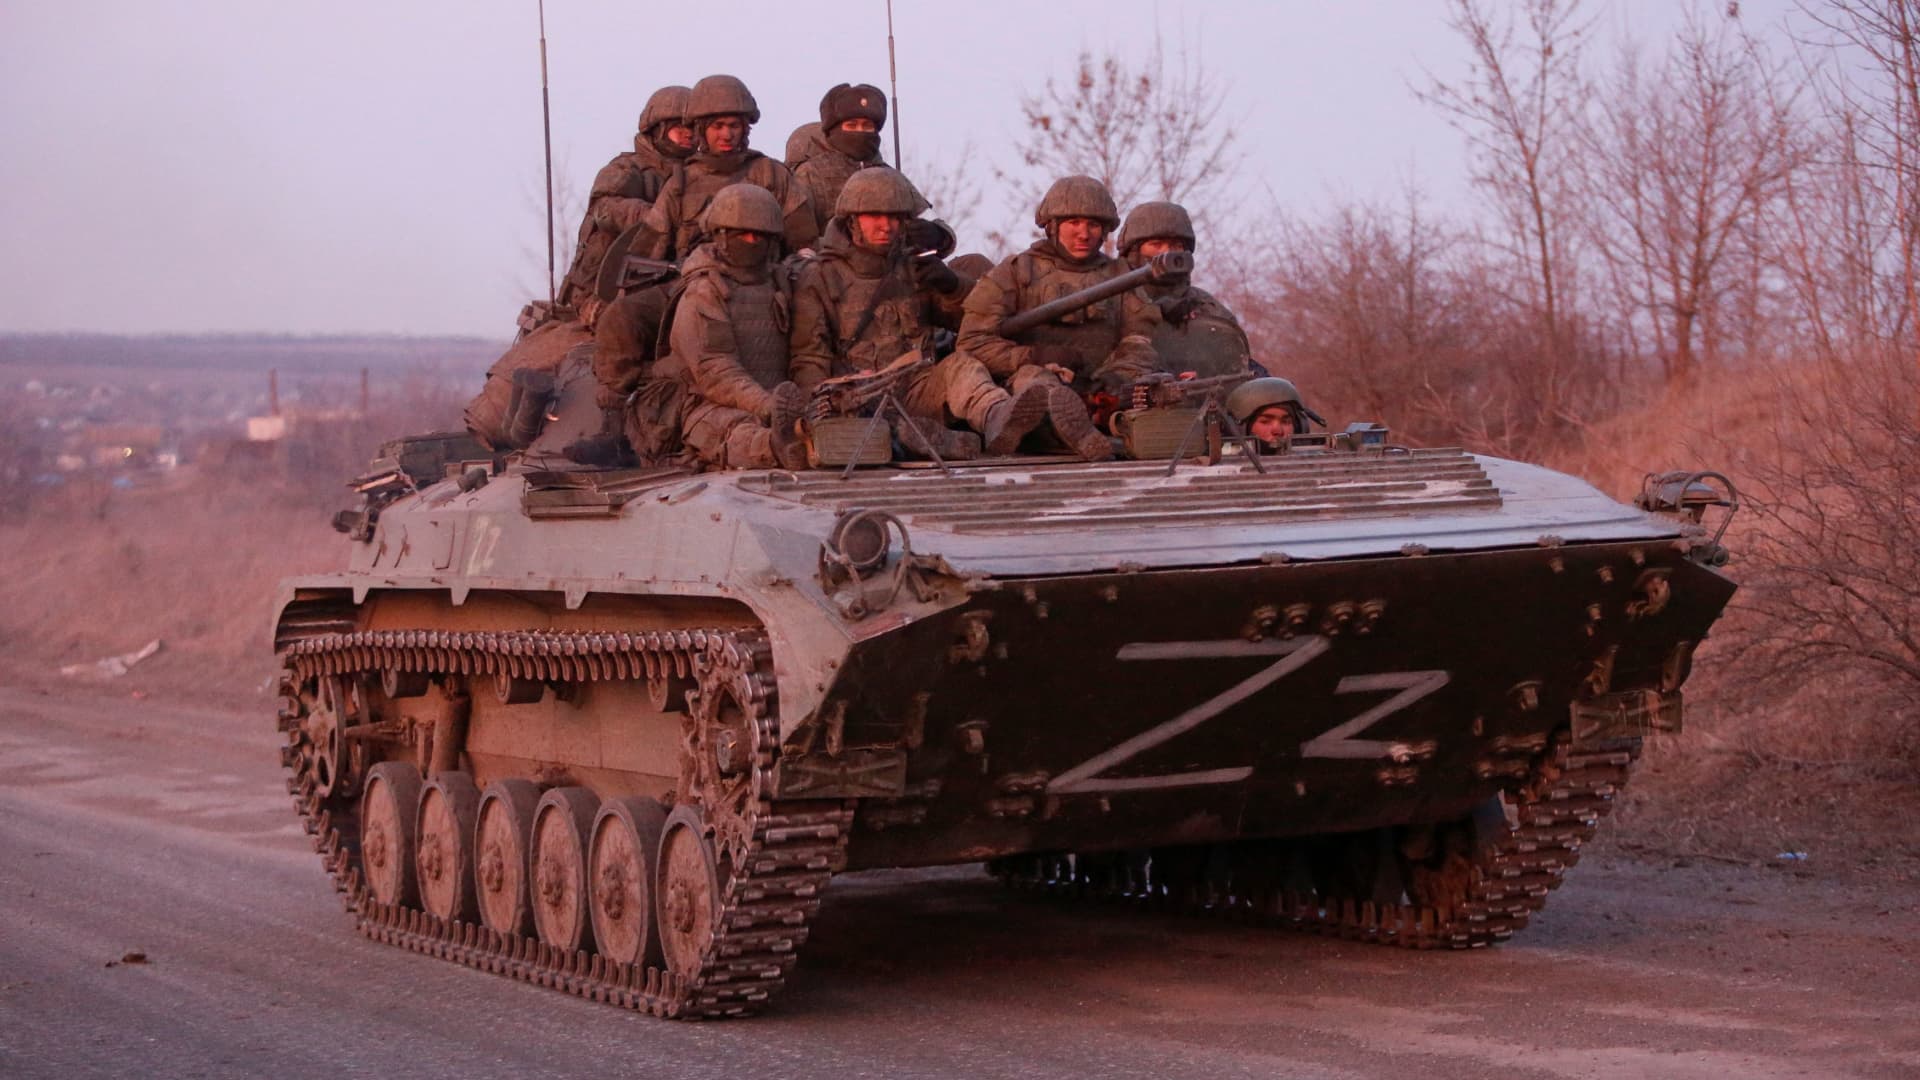 Service members of pro-Russian troops are seen atop of an armoured vehicle in the course of Ukraine-Russia conflict on a road leading to the besieged southern port city of Mariupol, Ukraine March 28, 2022.